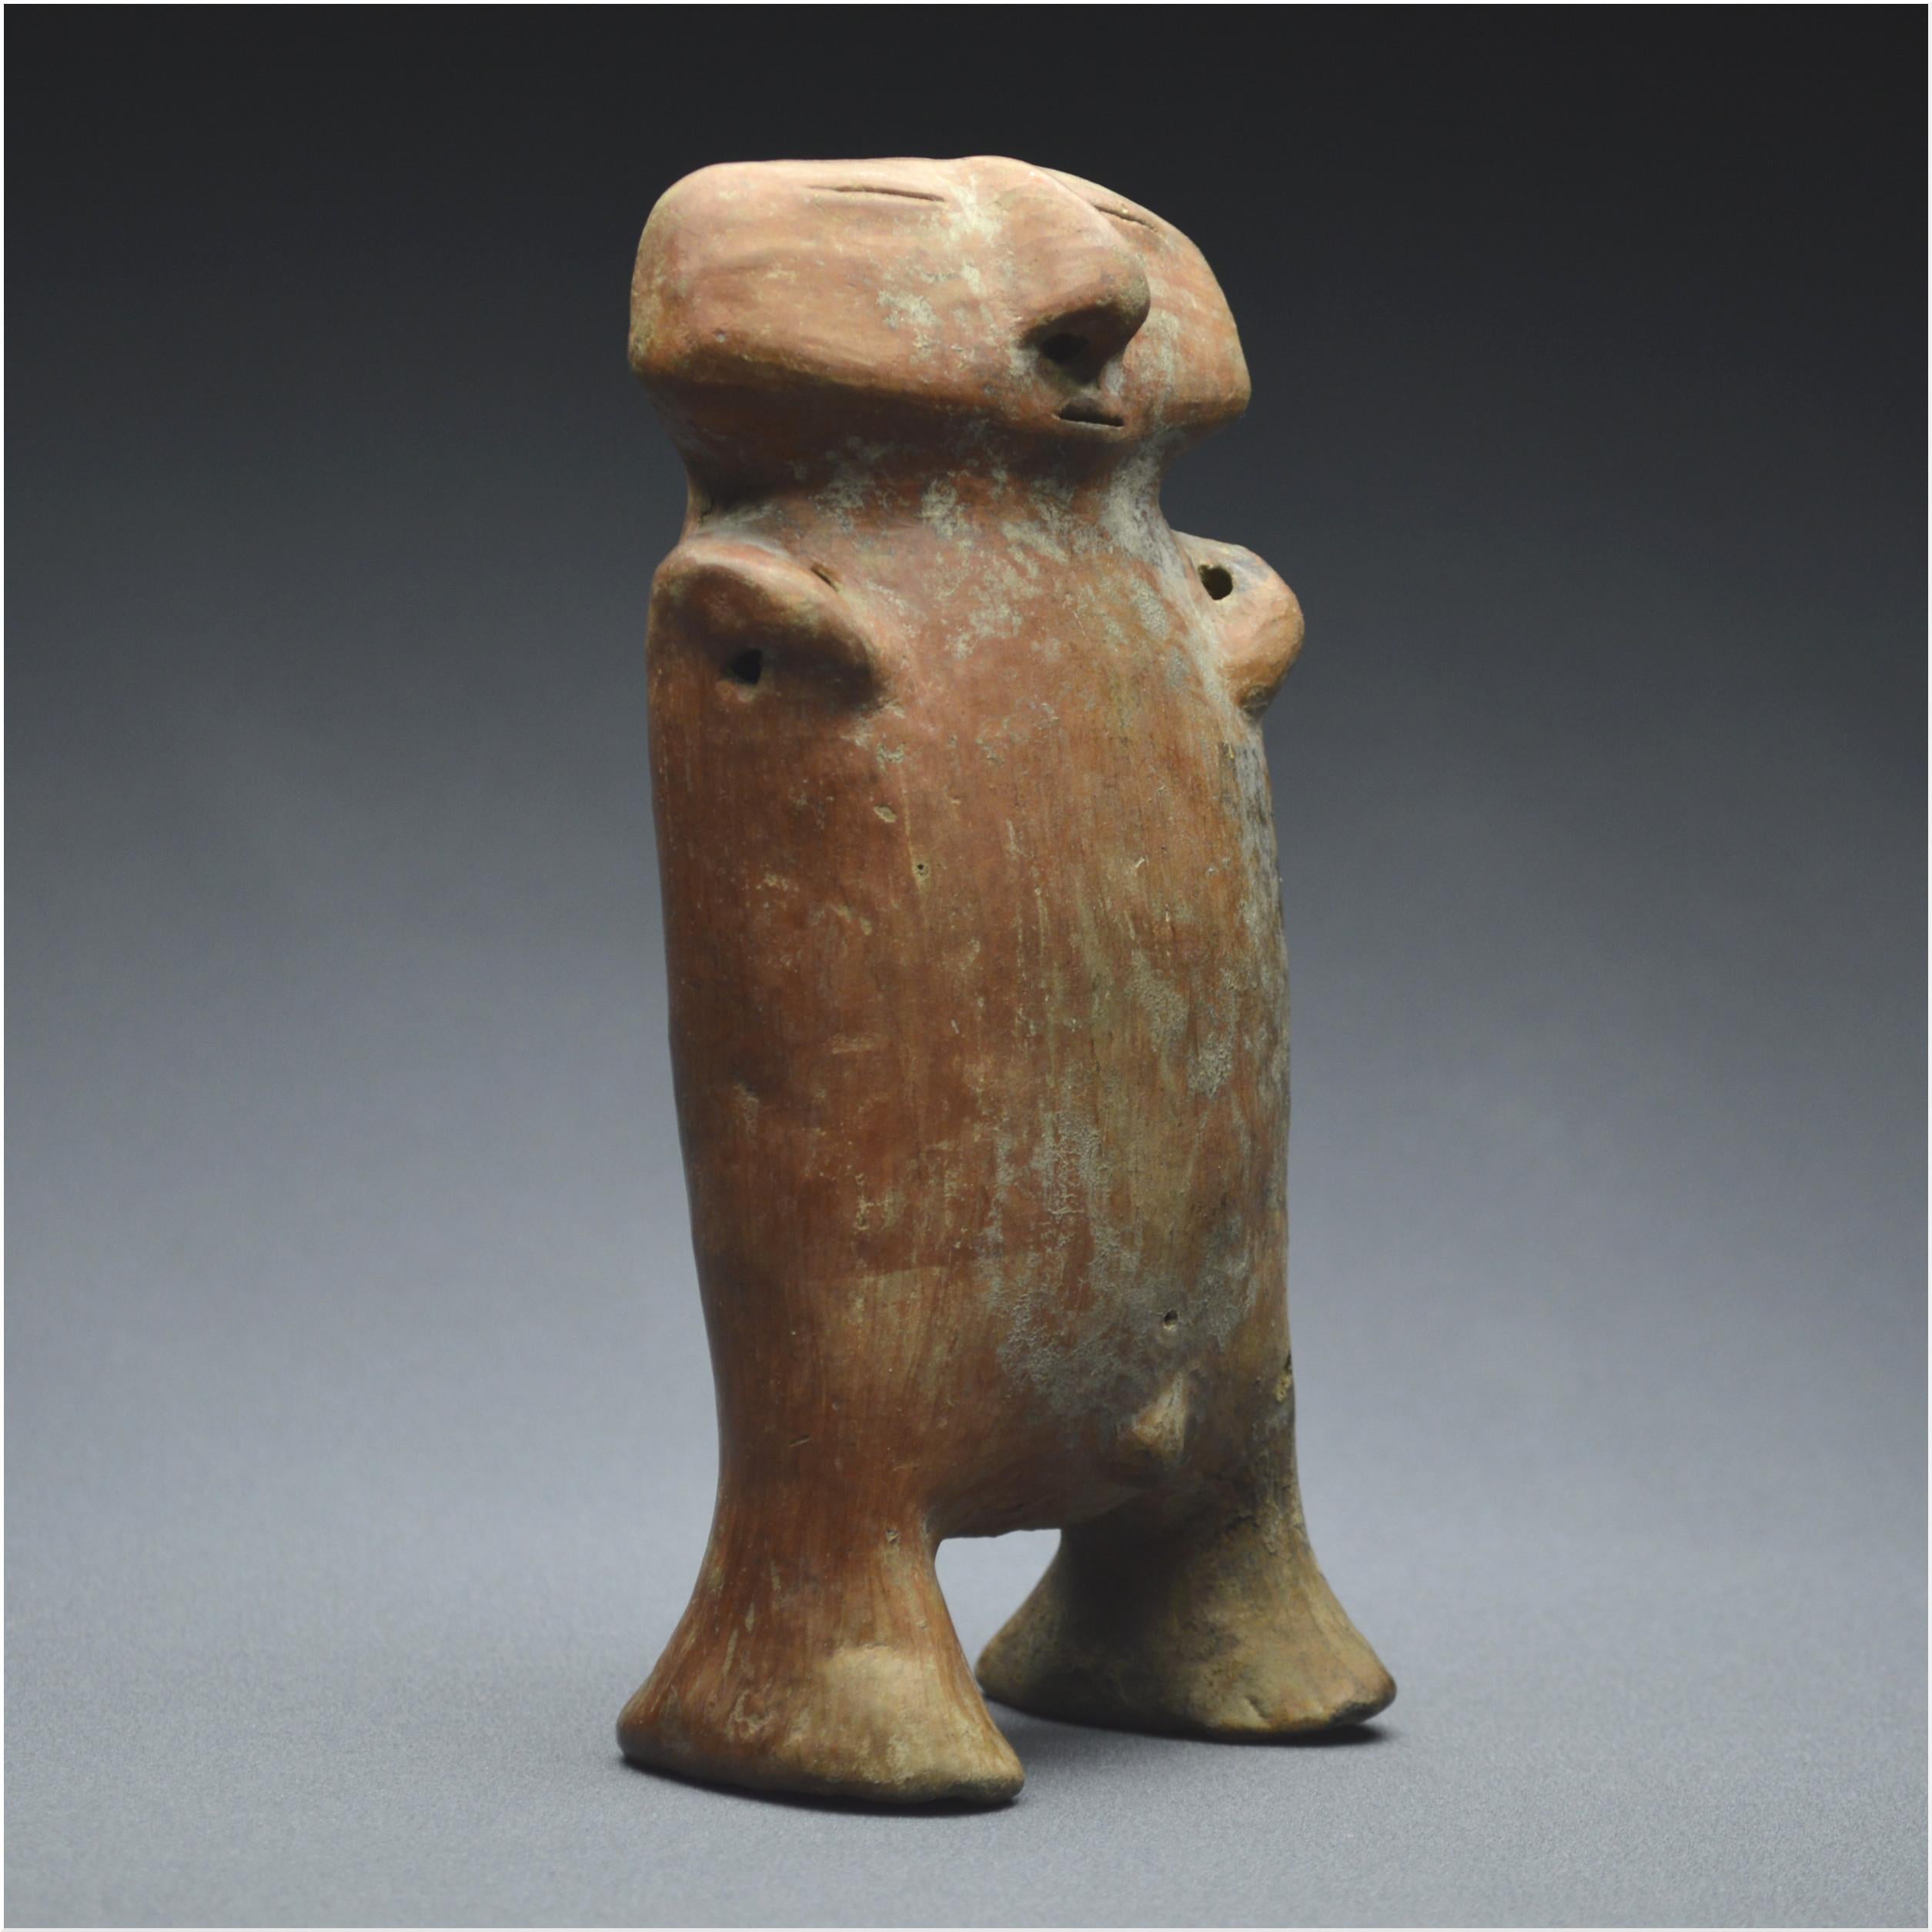 Colombia
Quimbaya Culture / 800 – 1200 AD


Anthropomorphic statuette representing a stylized character. Shown standing, he has an oblong body with atrophied sex and limbs, arms folded over the upper body. The head placed directly on the body